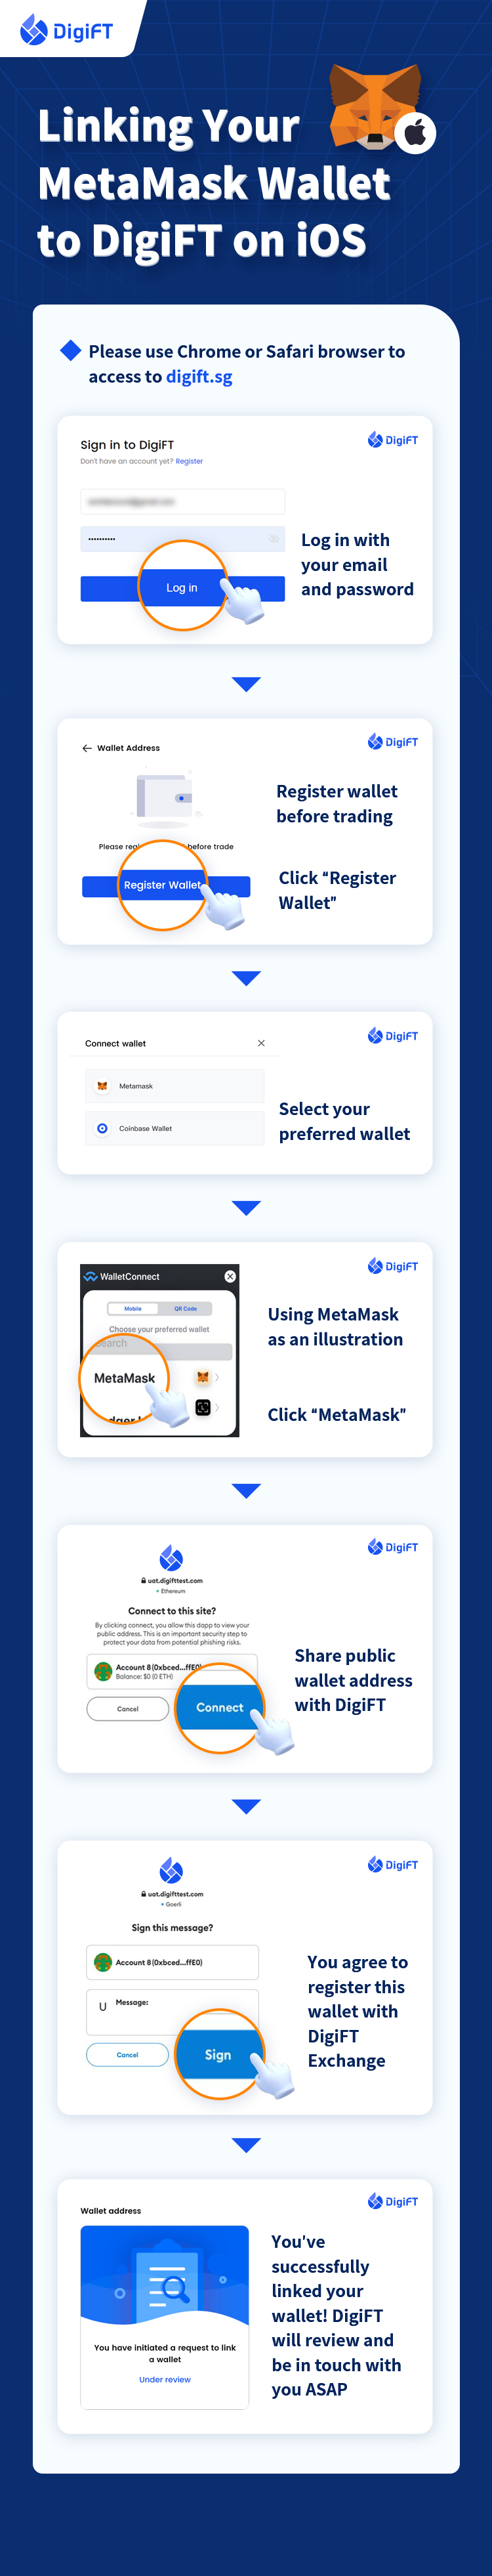 Linking Your MetaMask Wallet to DigiFT (iOS).jpg